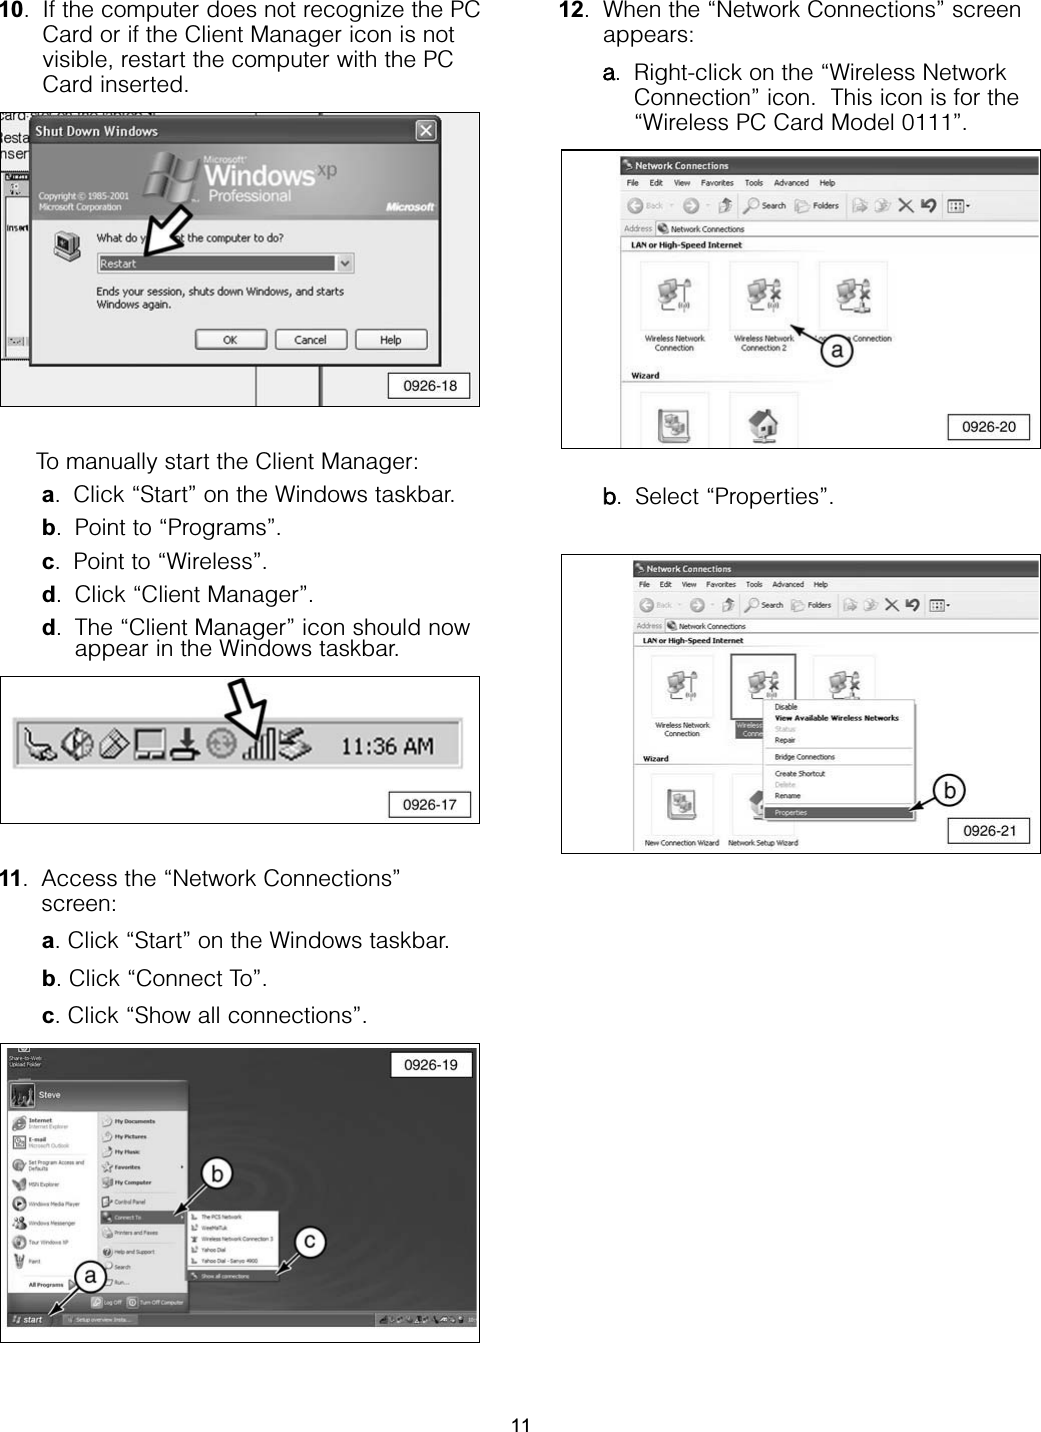 10. If the computer does not recognize the PCCard or if the Client Manager icon is notvisible, restart the computer with the PCCard inserted.To manually start the Client Manager:a. Click “Start” on the Windows taskbar.b. Point to “Programs”.c. Point to “Wireless”.d. Click “Client Manager”.d. The “Client Manager” icon should nowappear in the Windows taskbar. 11. Access the “Network Connections”screen: a. Click “Start” on the Windows taskbar.b. Click “Connect To”.c. Click “Show all connections”. 12. When the “Network Connections” screenappears:a. Right-click on the “Wireless NetworkConnection” icon.  This icon is for the“Wireless PC Card Model 0111”.b. Select “Properties”.11